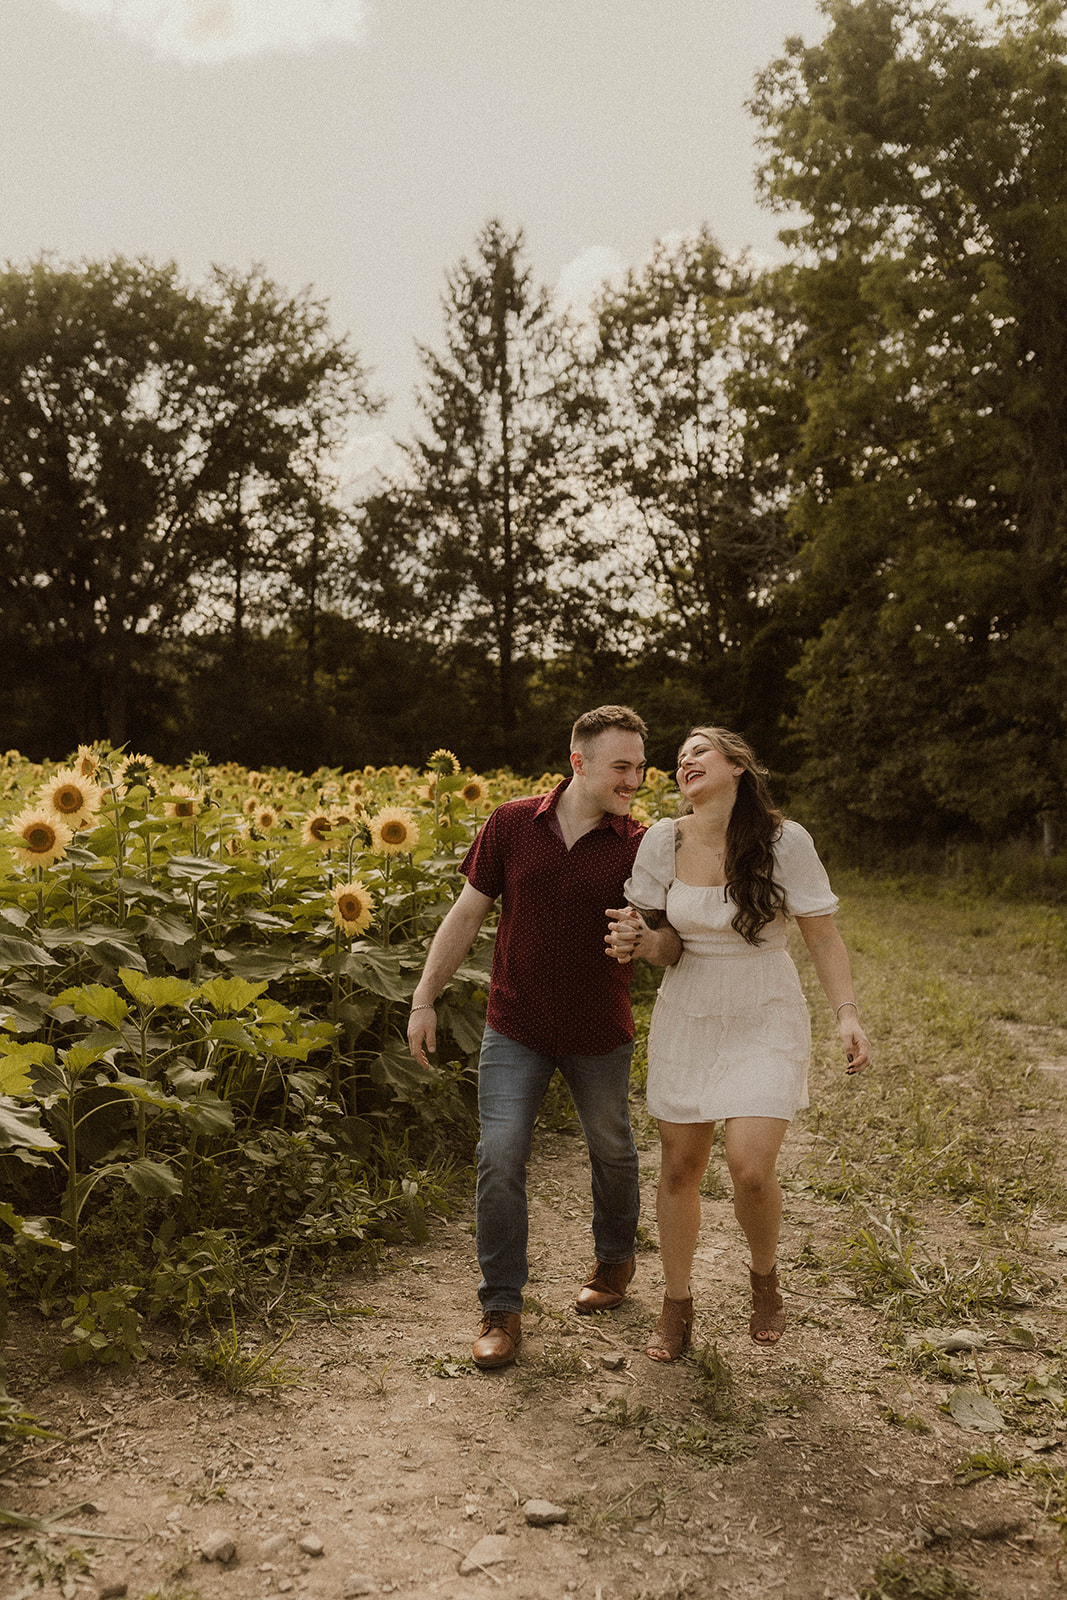 Couples photoshoot in sunflower field with cute golden hour photos and intimate moments